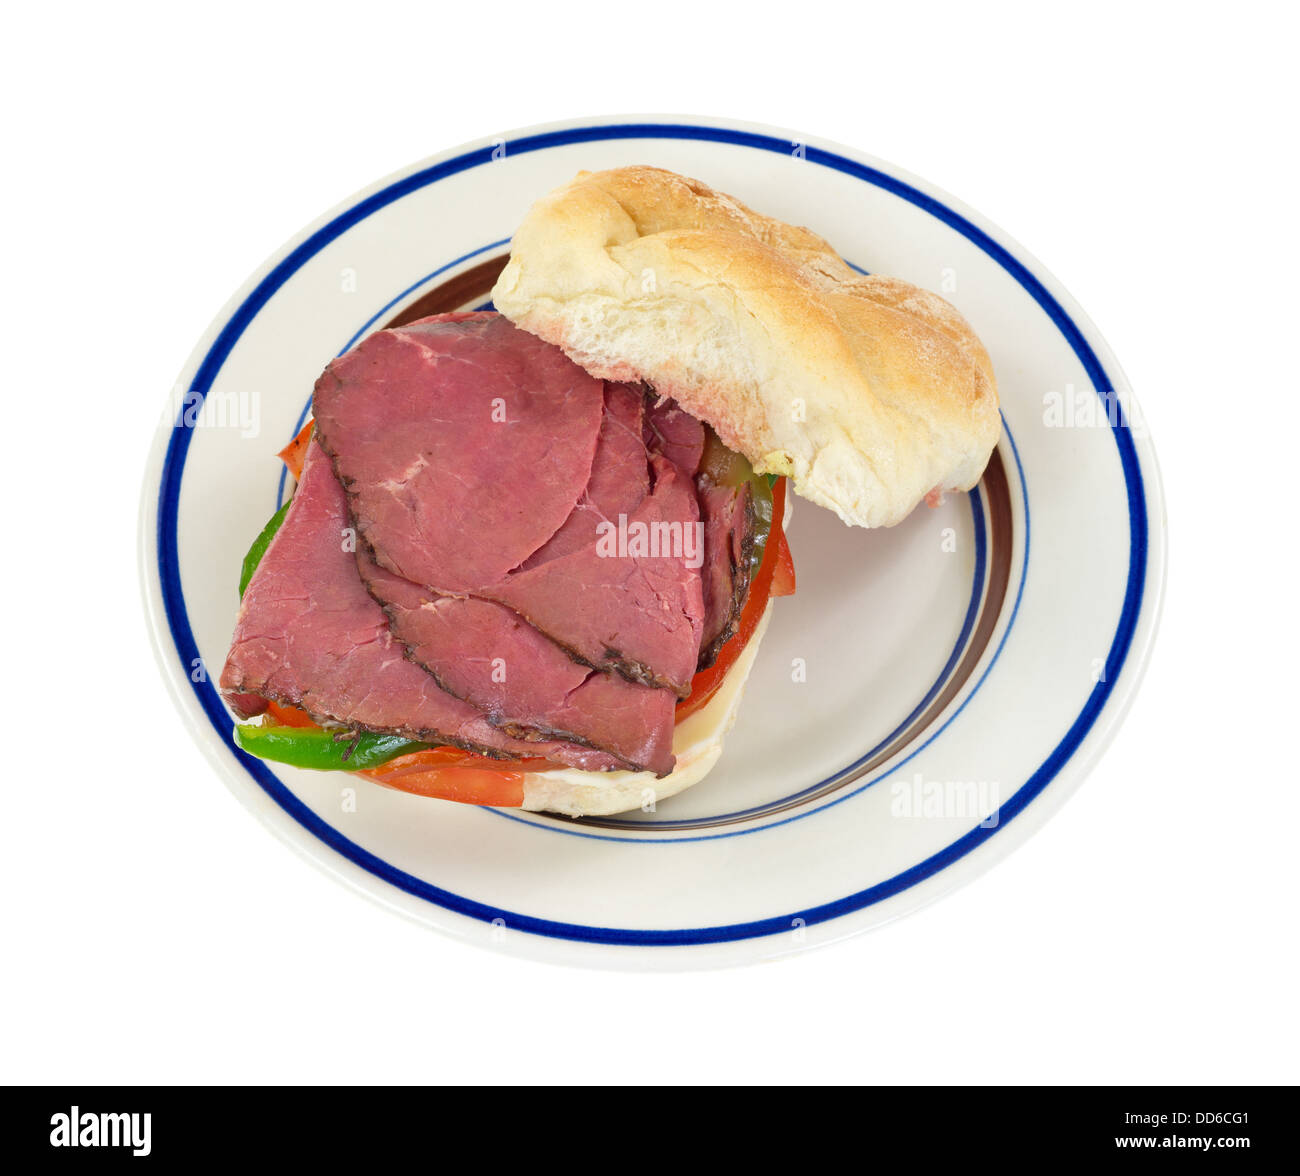 A rare roast beef sandwich with bulky roll on a plate. Stock Photo